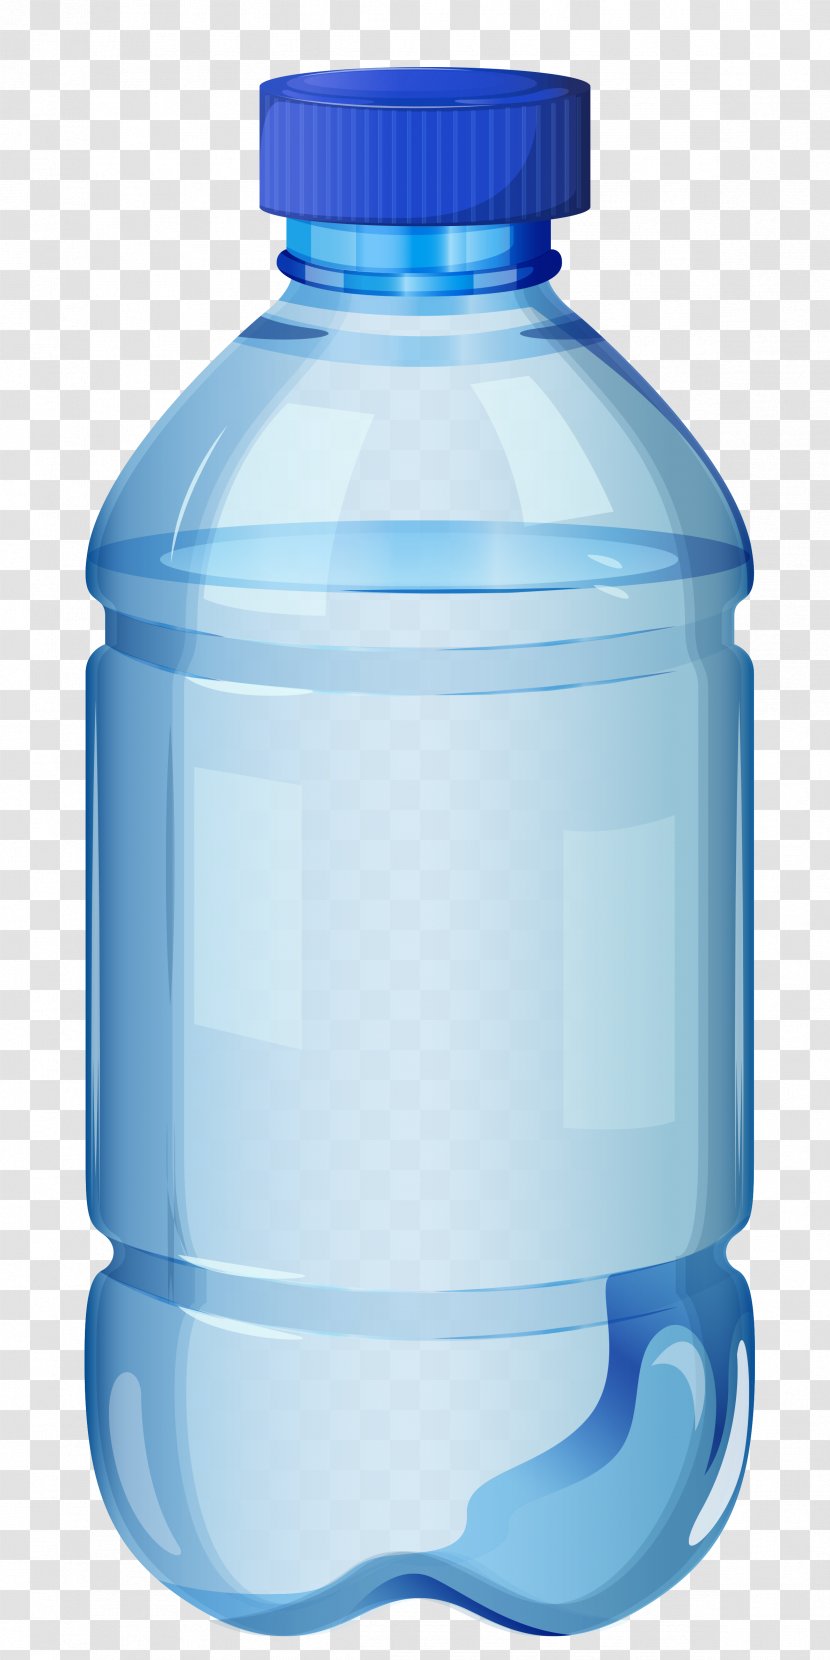 Water Bottle Clip Art - Container - Image Transparent PNG